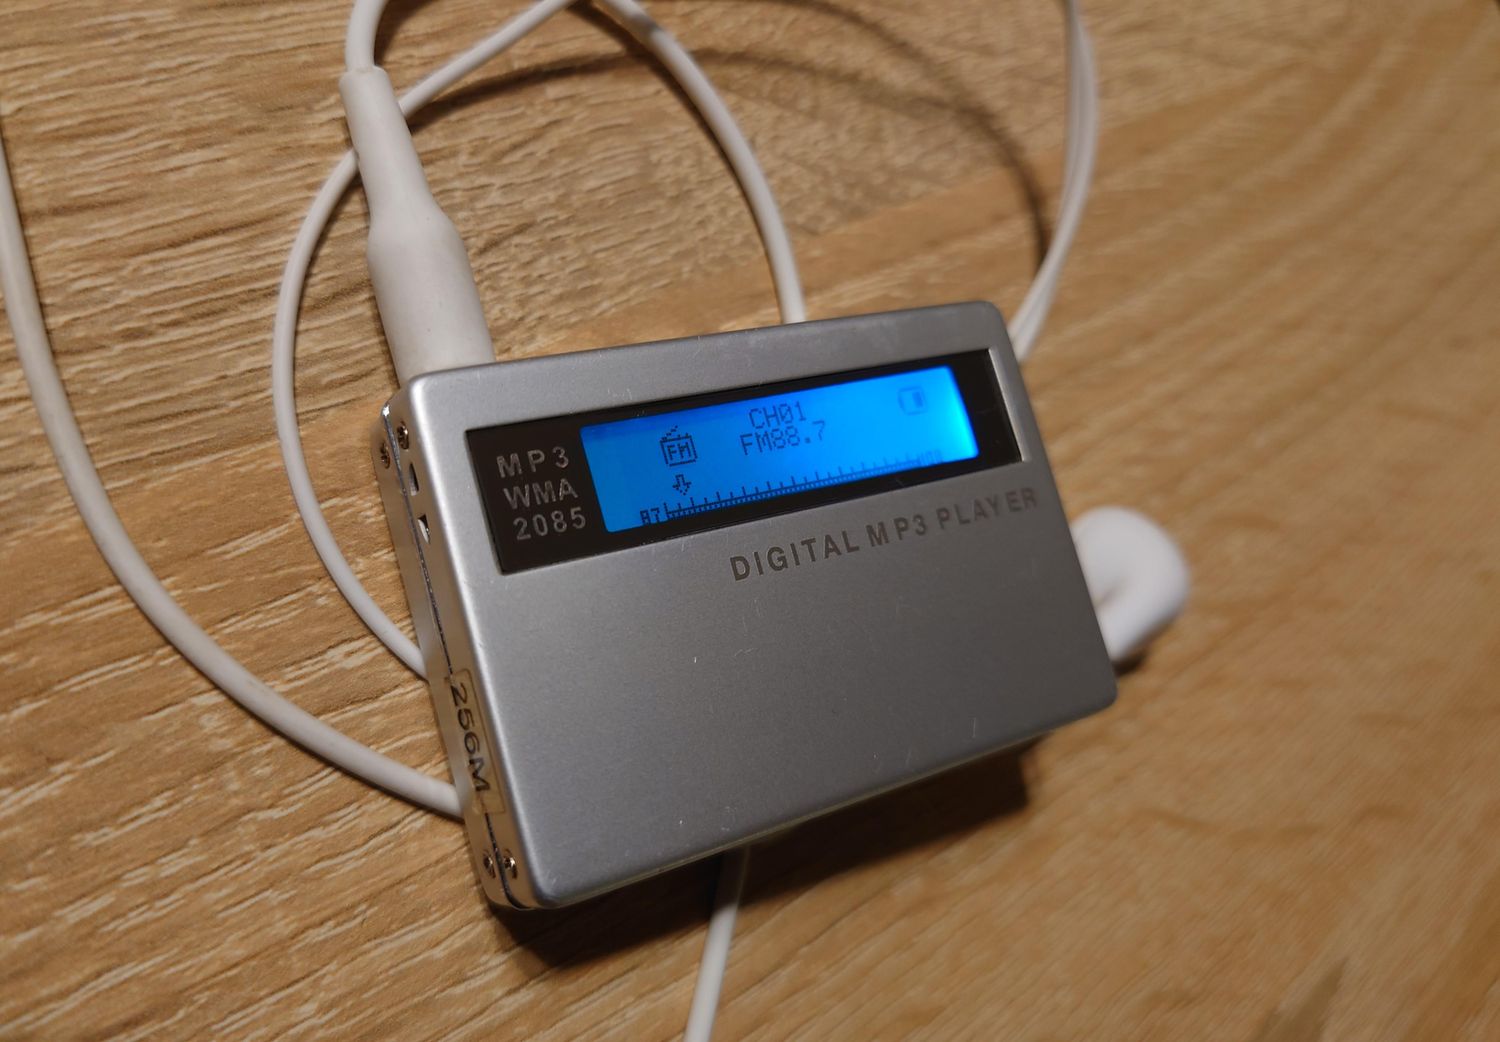 How To Add Music To The Digital MP3 Player